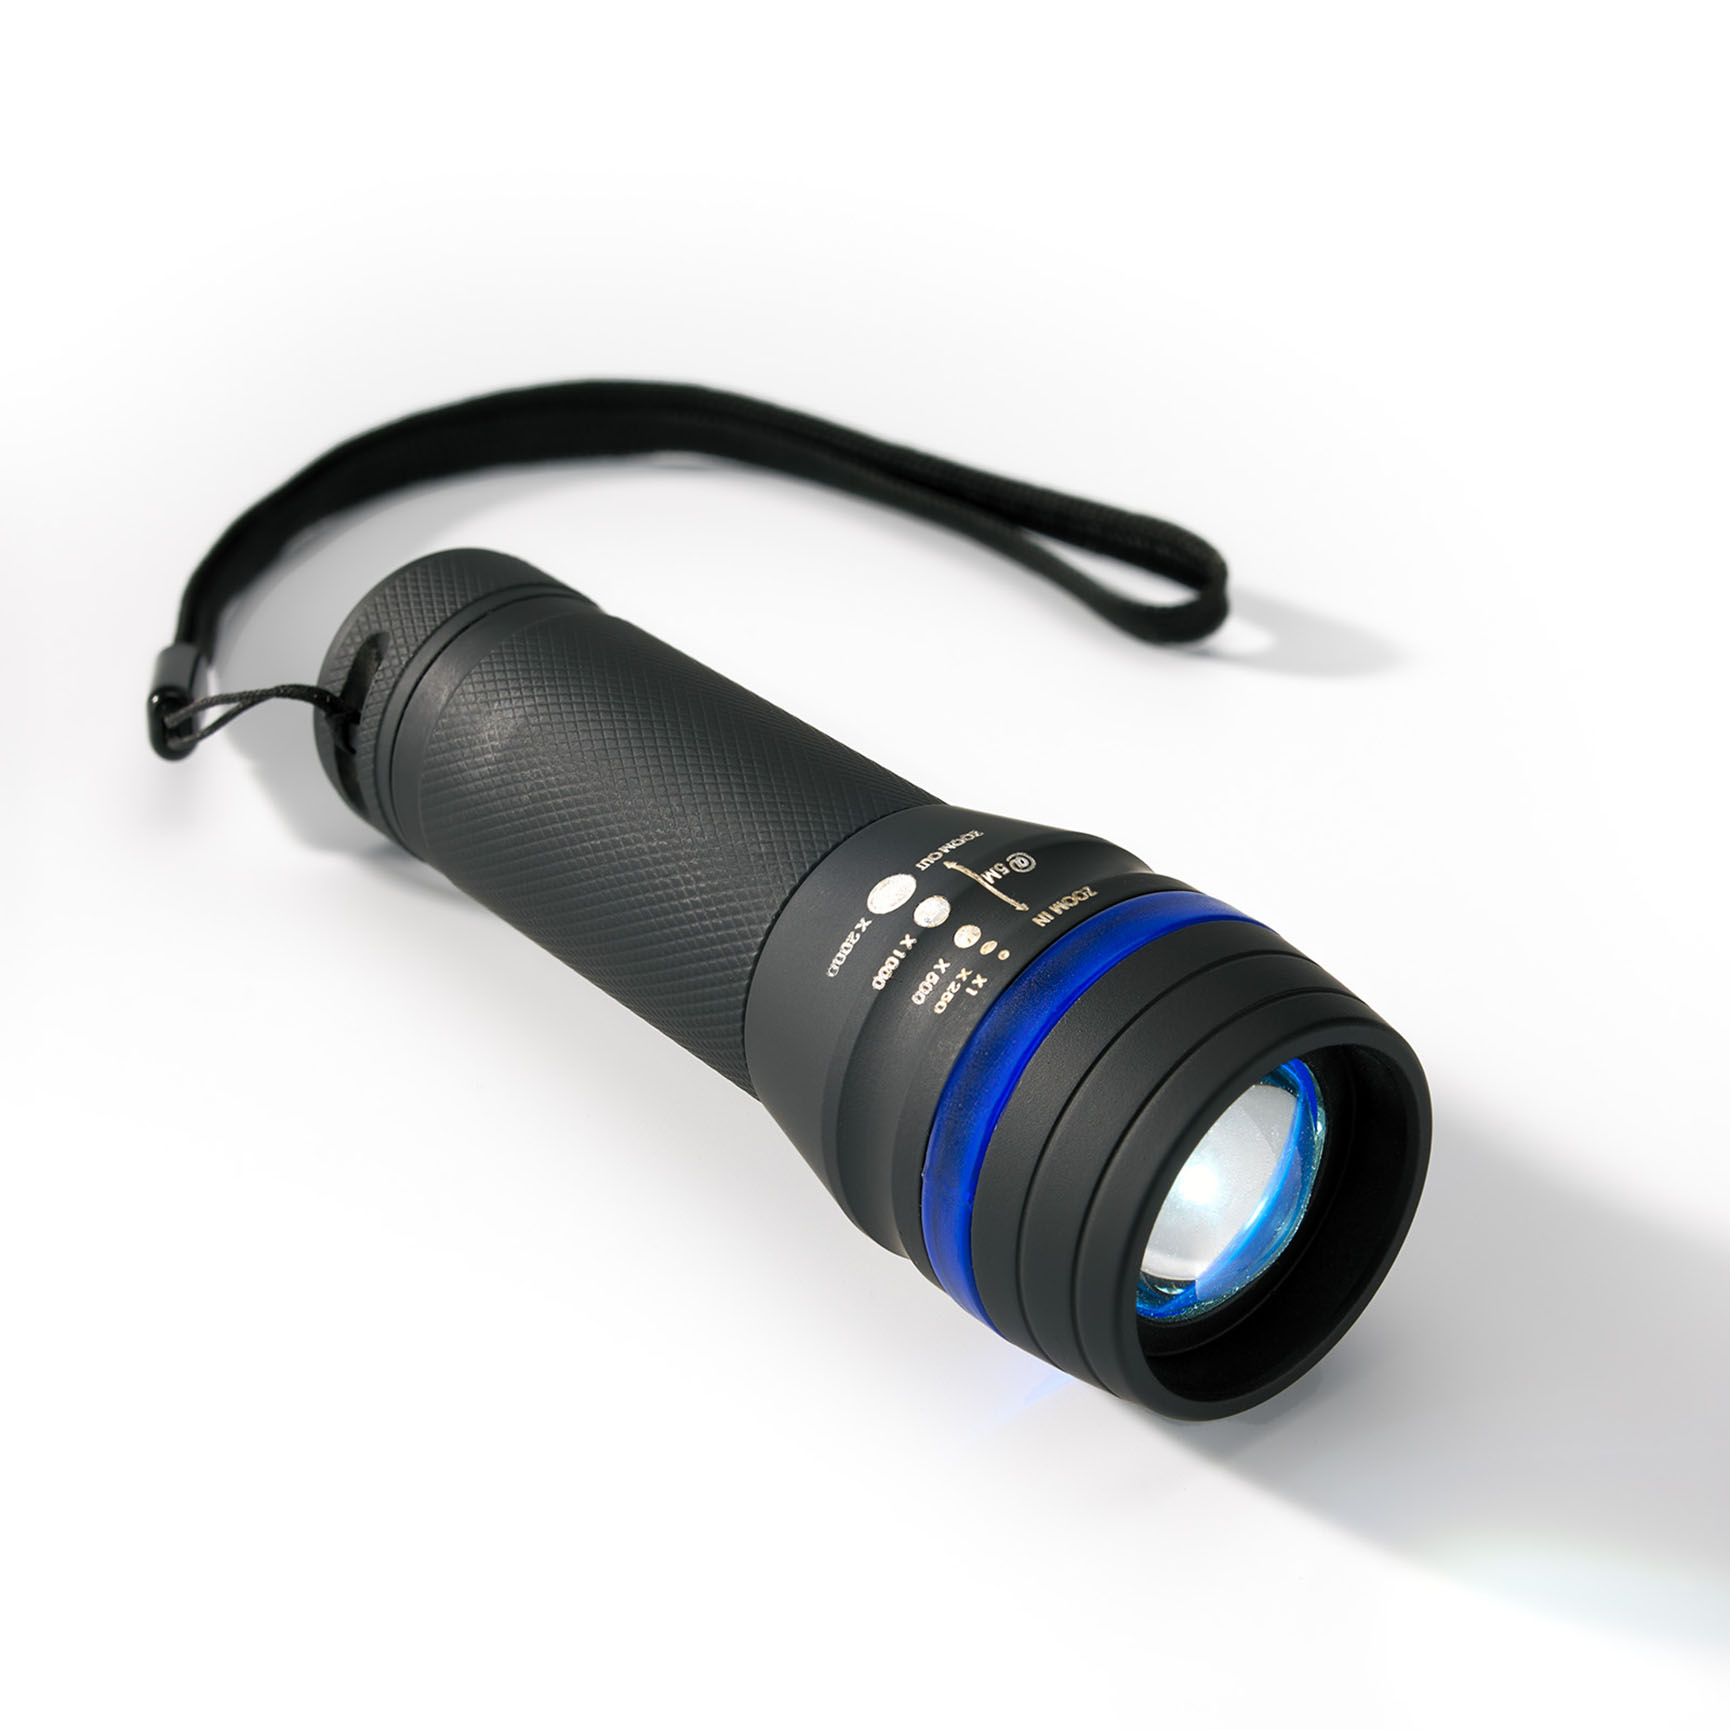 Branded LED TORCH BBY PAINTURISSIMO